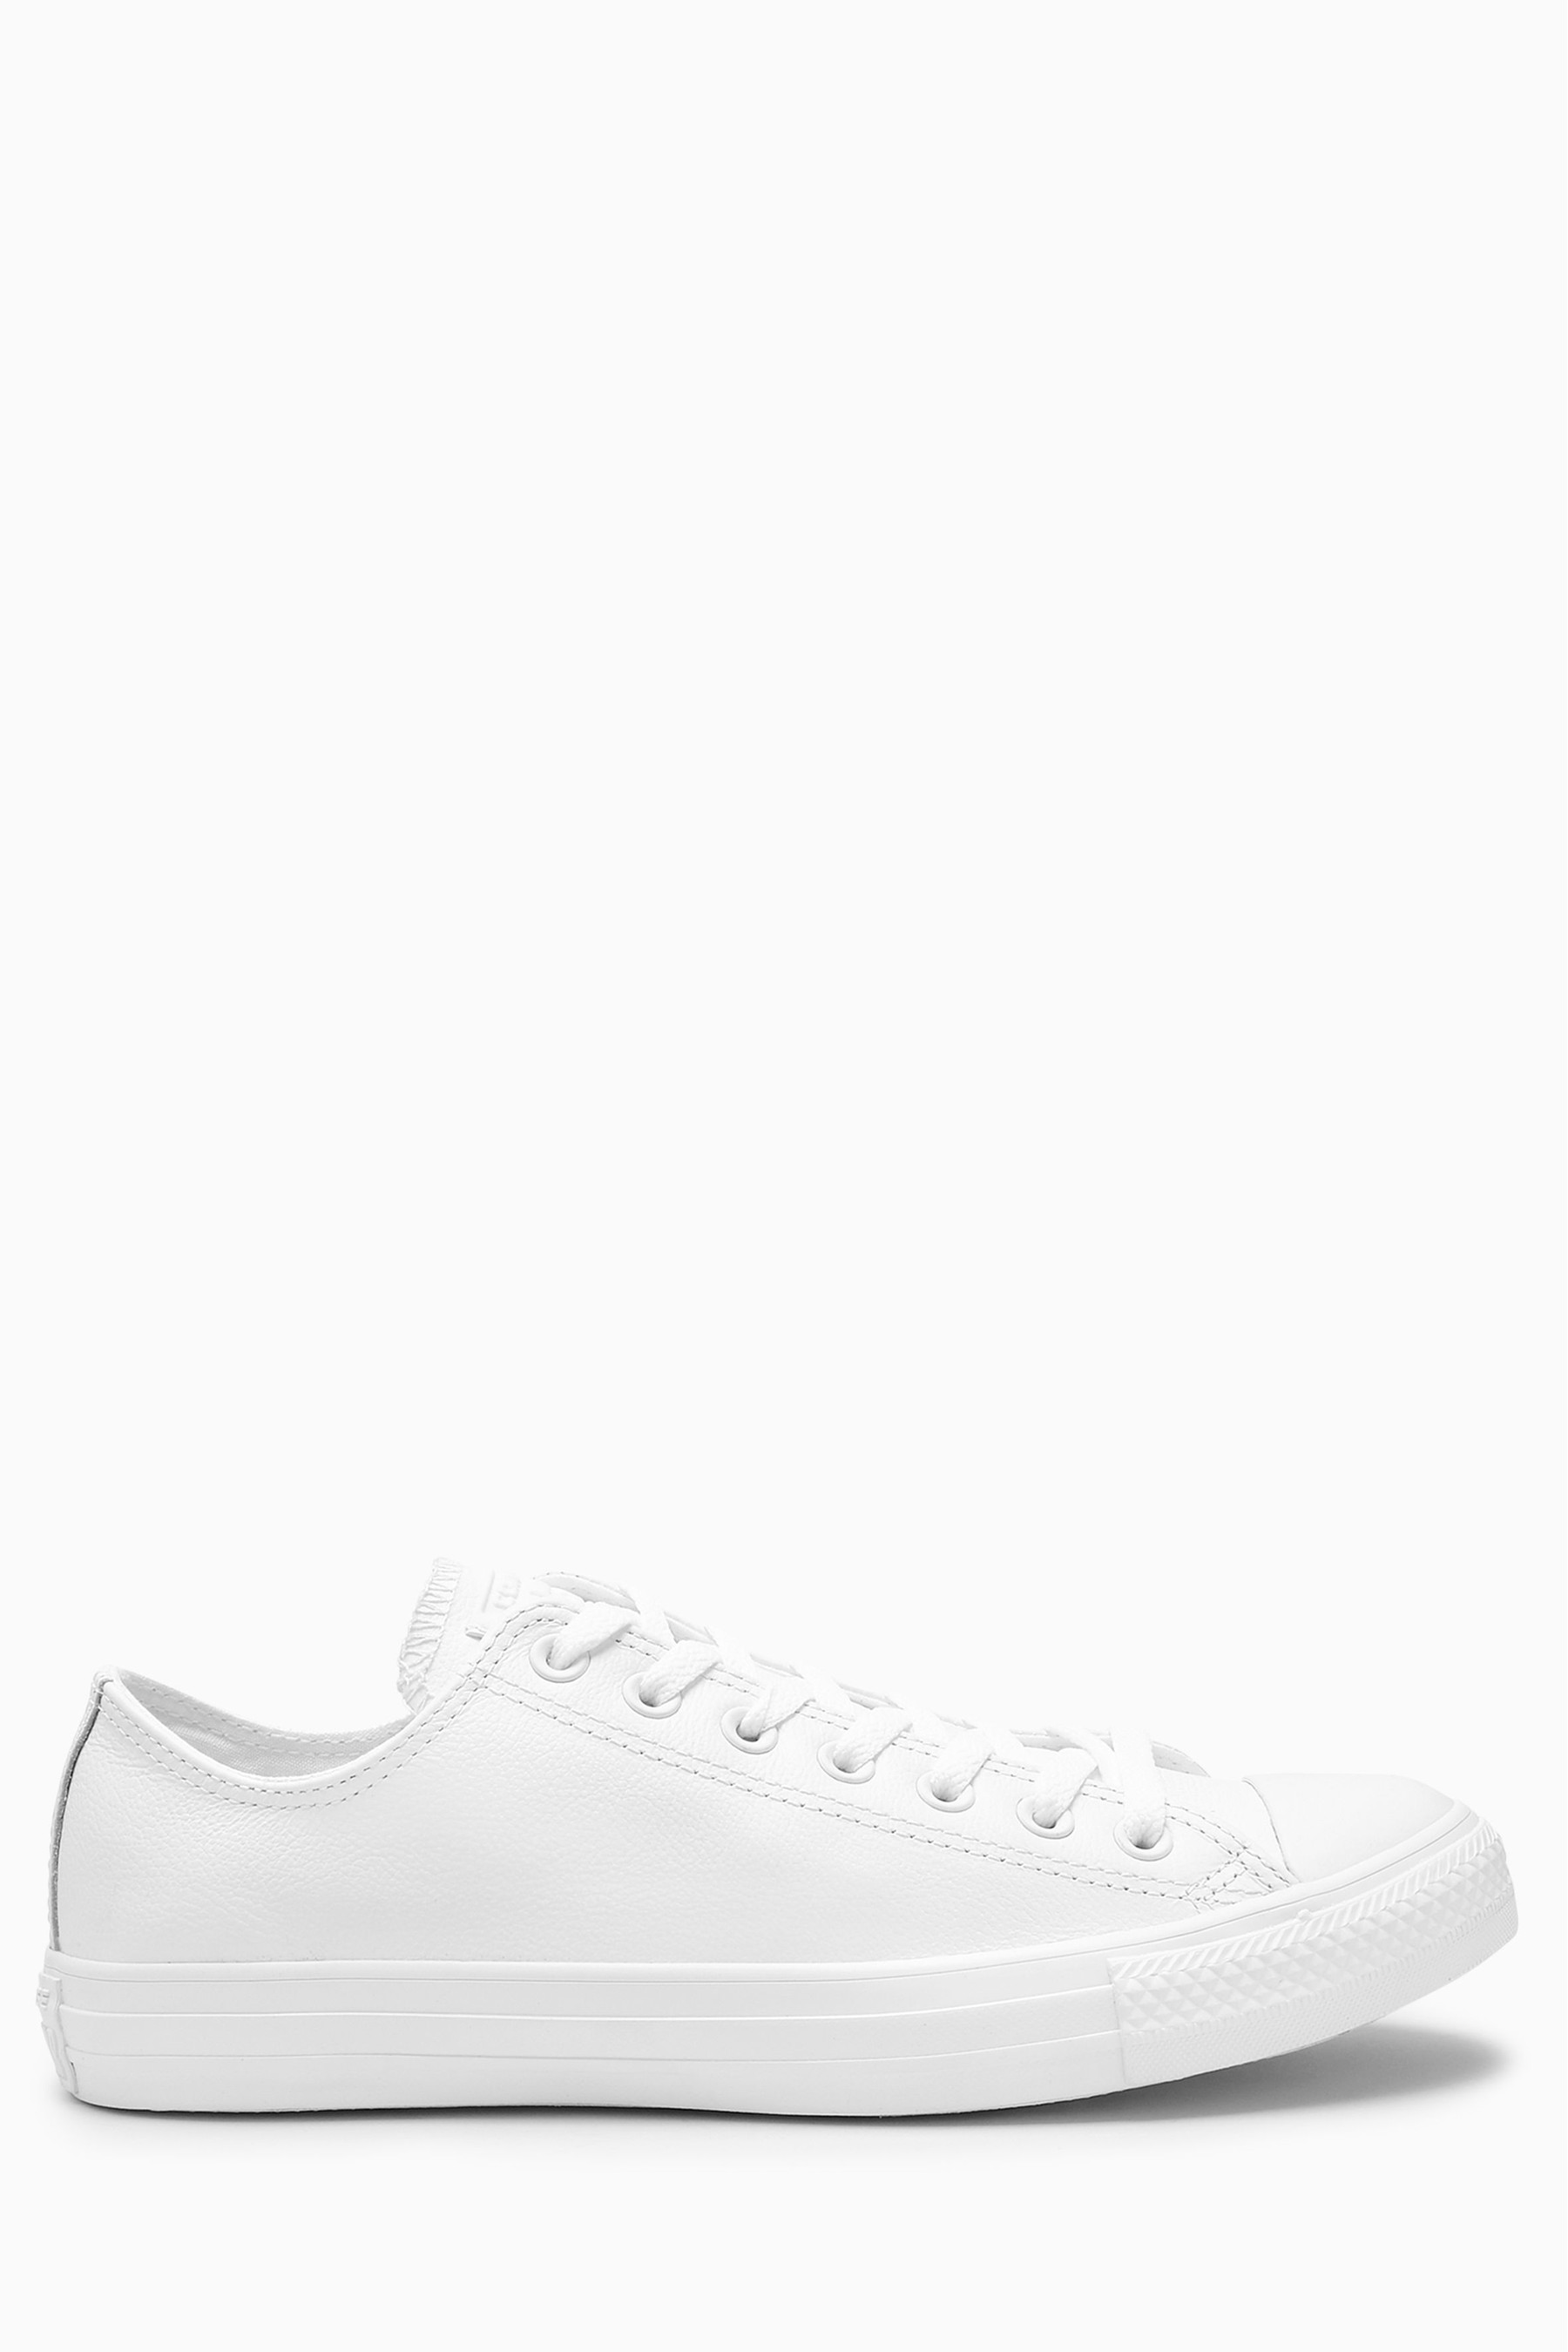 Converse Leather Chuck Ox Trainers